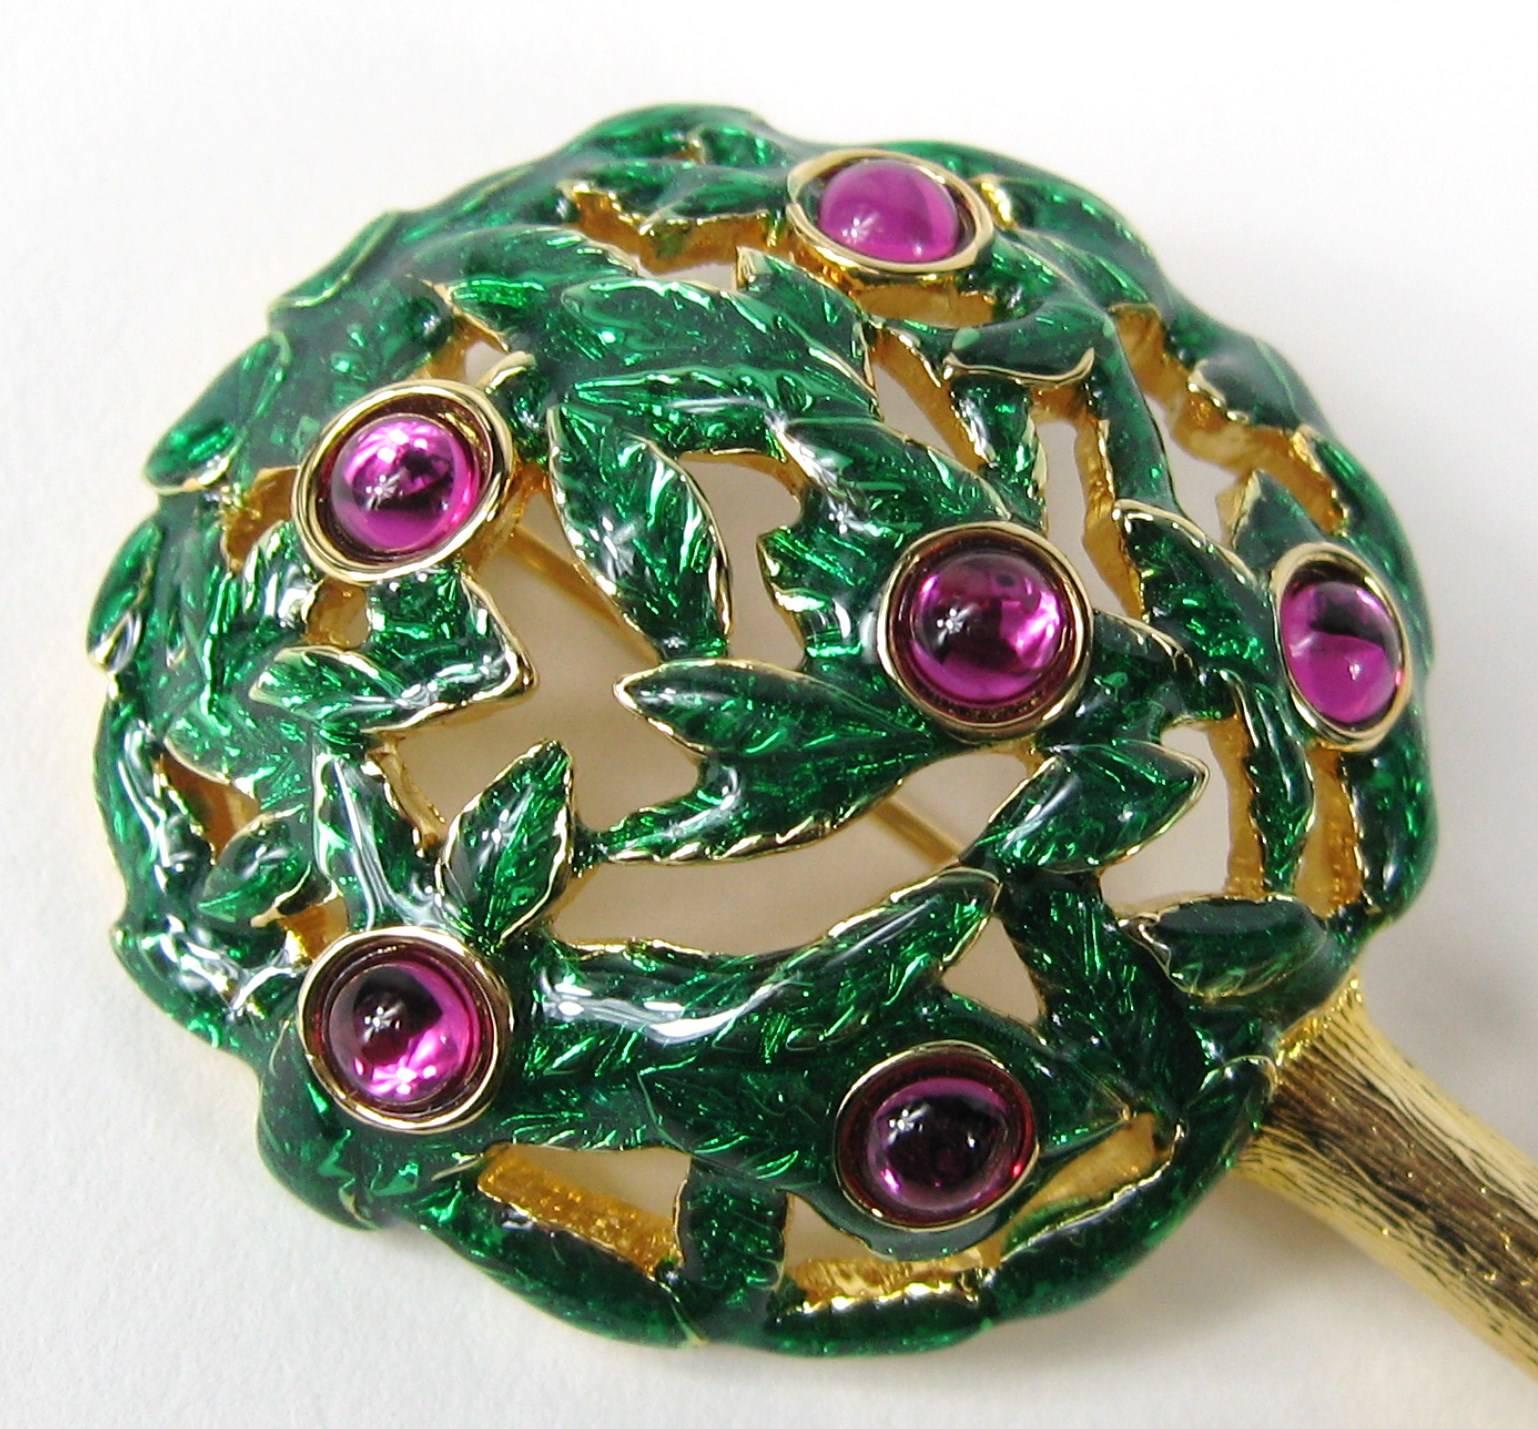  Swarovski Crystal Enameled Tree Brooch Pin New,  Never worn 1980s In New Condition For Sale In Wallkill, NY